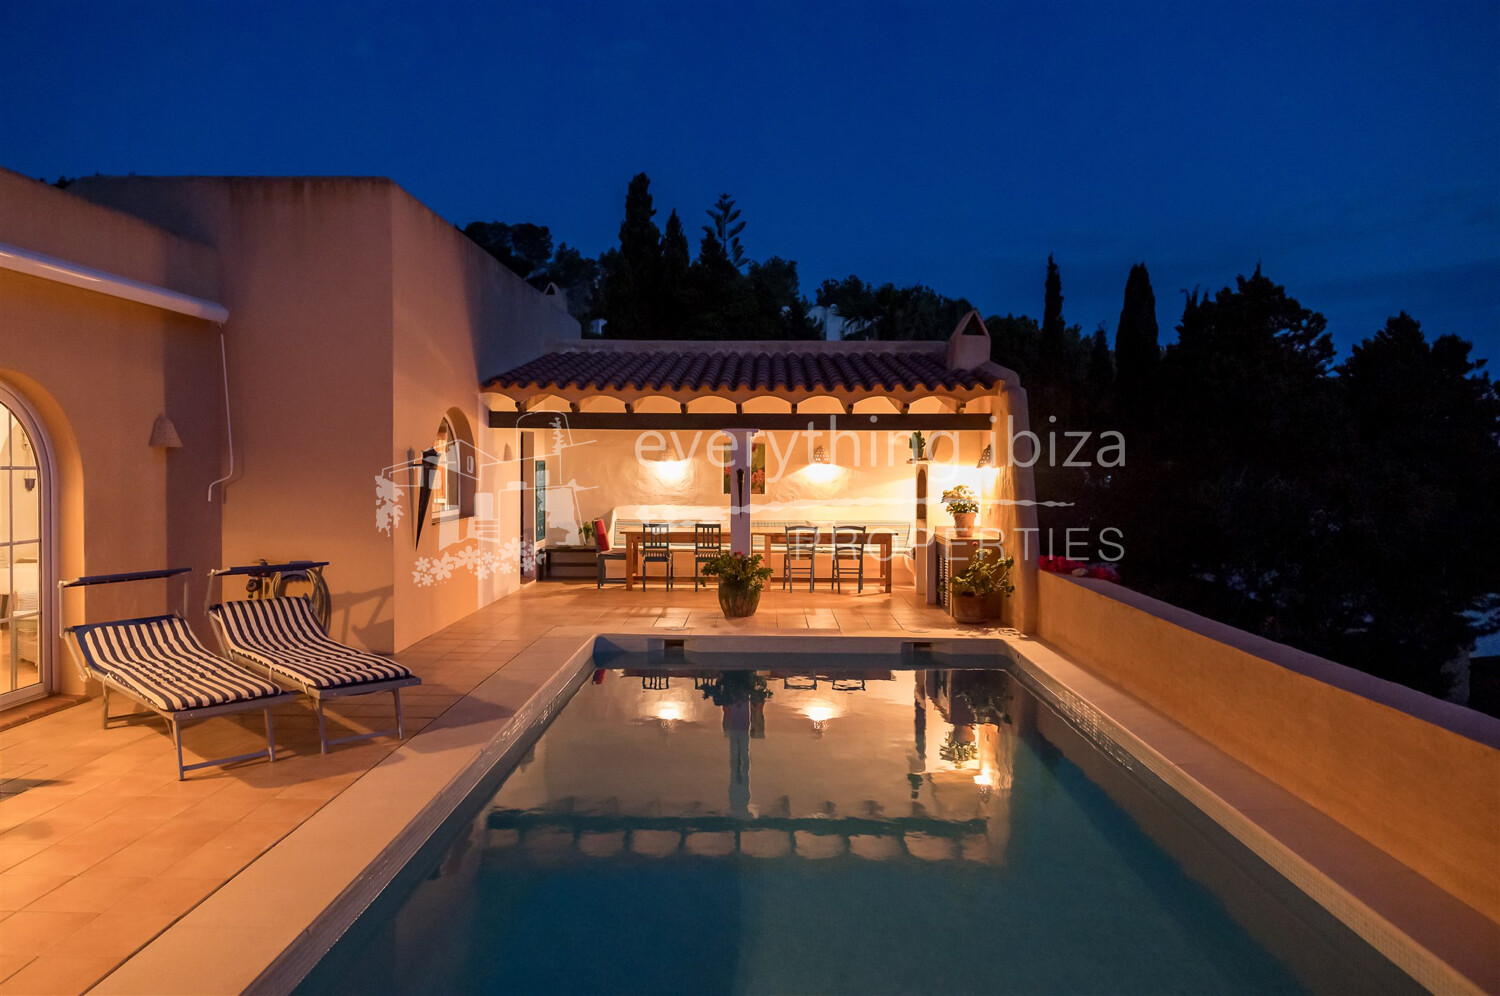 Beautiful Stylish Villa Near to the Beach with Sea & Sunset Views, ref. 1605, for sale in Ibiza by everything ibiza Properties